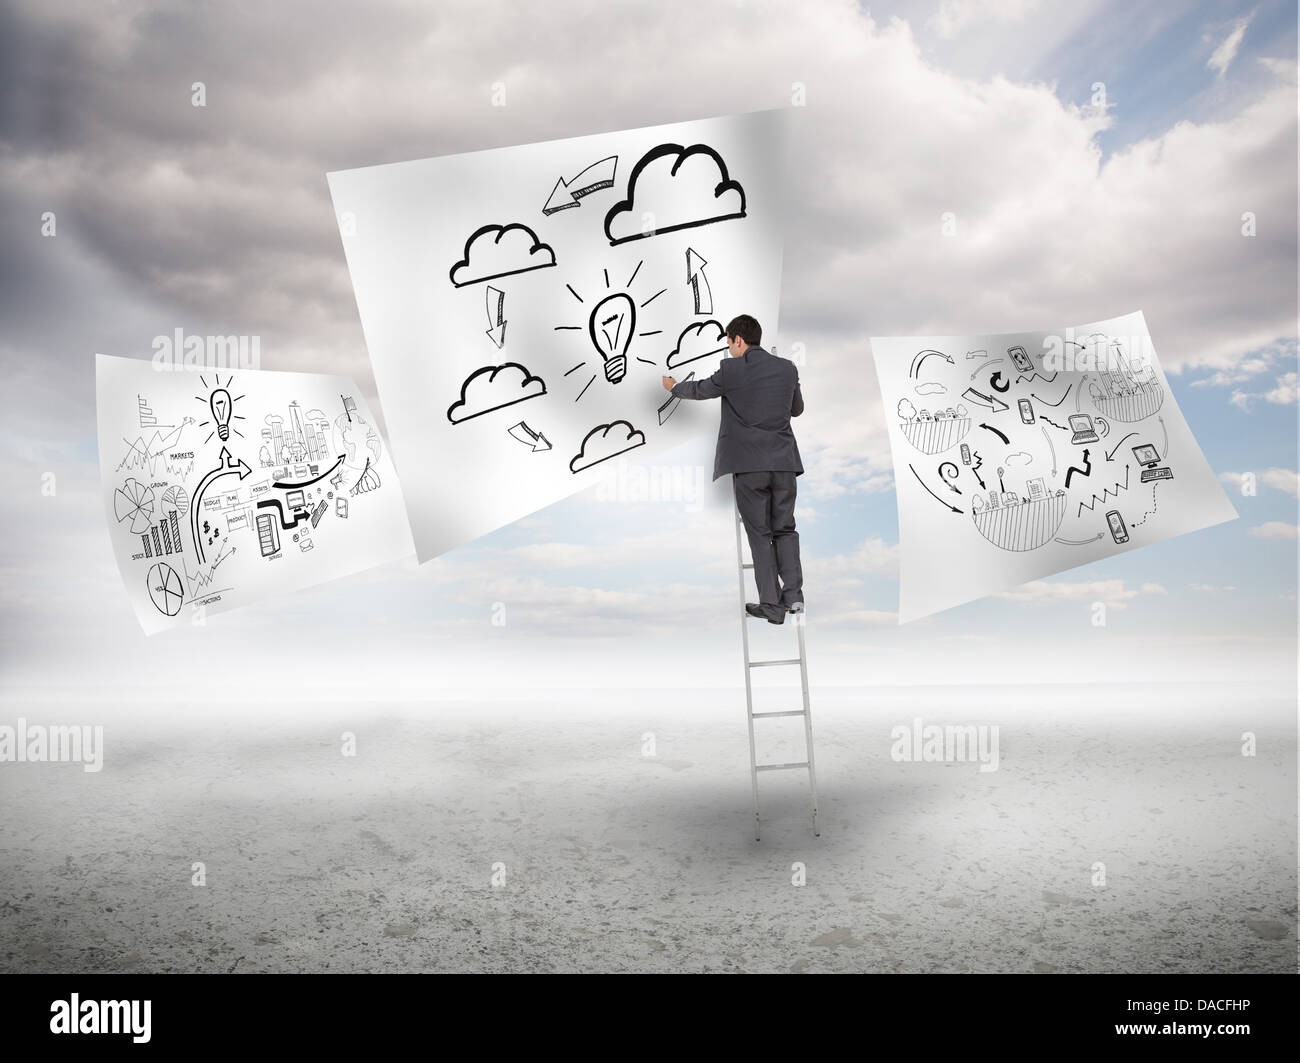 Businessman on a ladder drawing a process Stock Photo